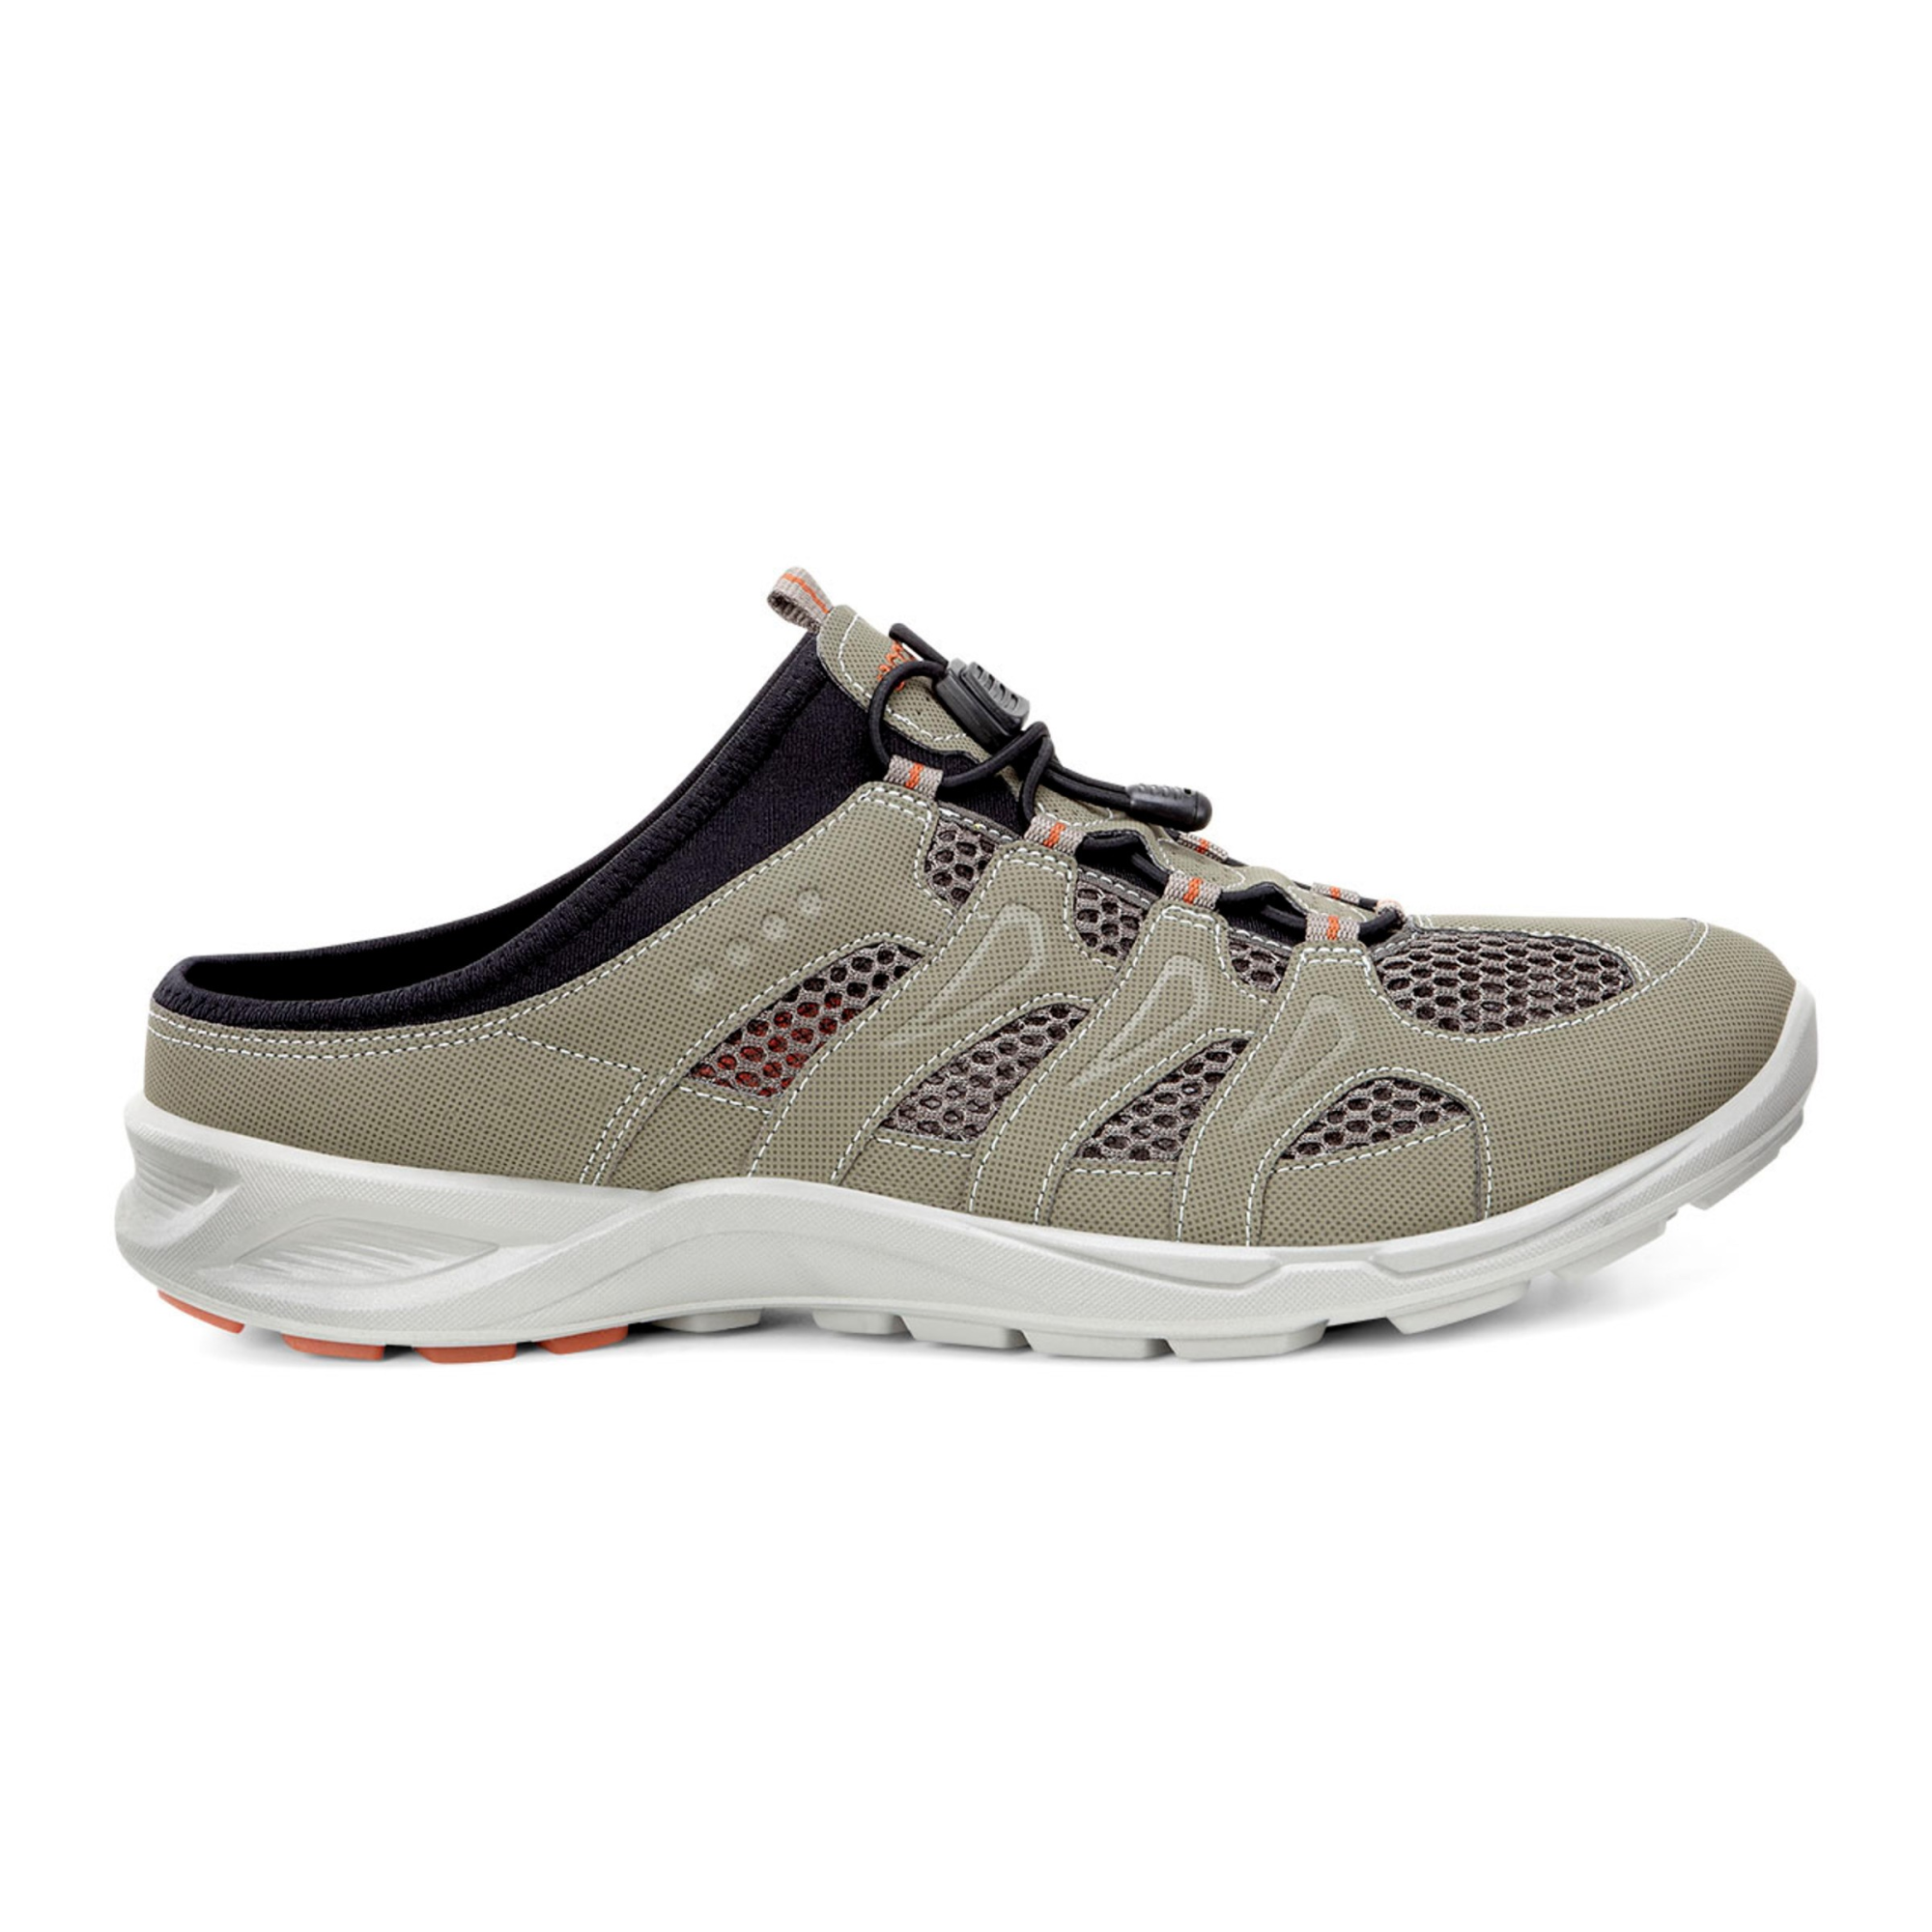 Ecco Mens Terracruise Slide 45 - Products - Veryk Mall - Veryk Mall, product, quick response, safe your money!